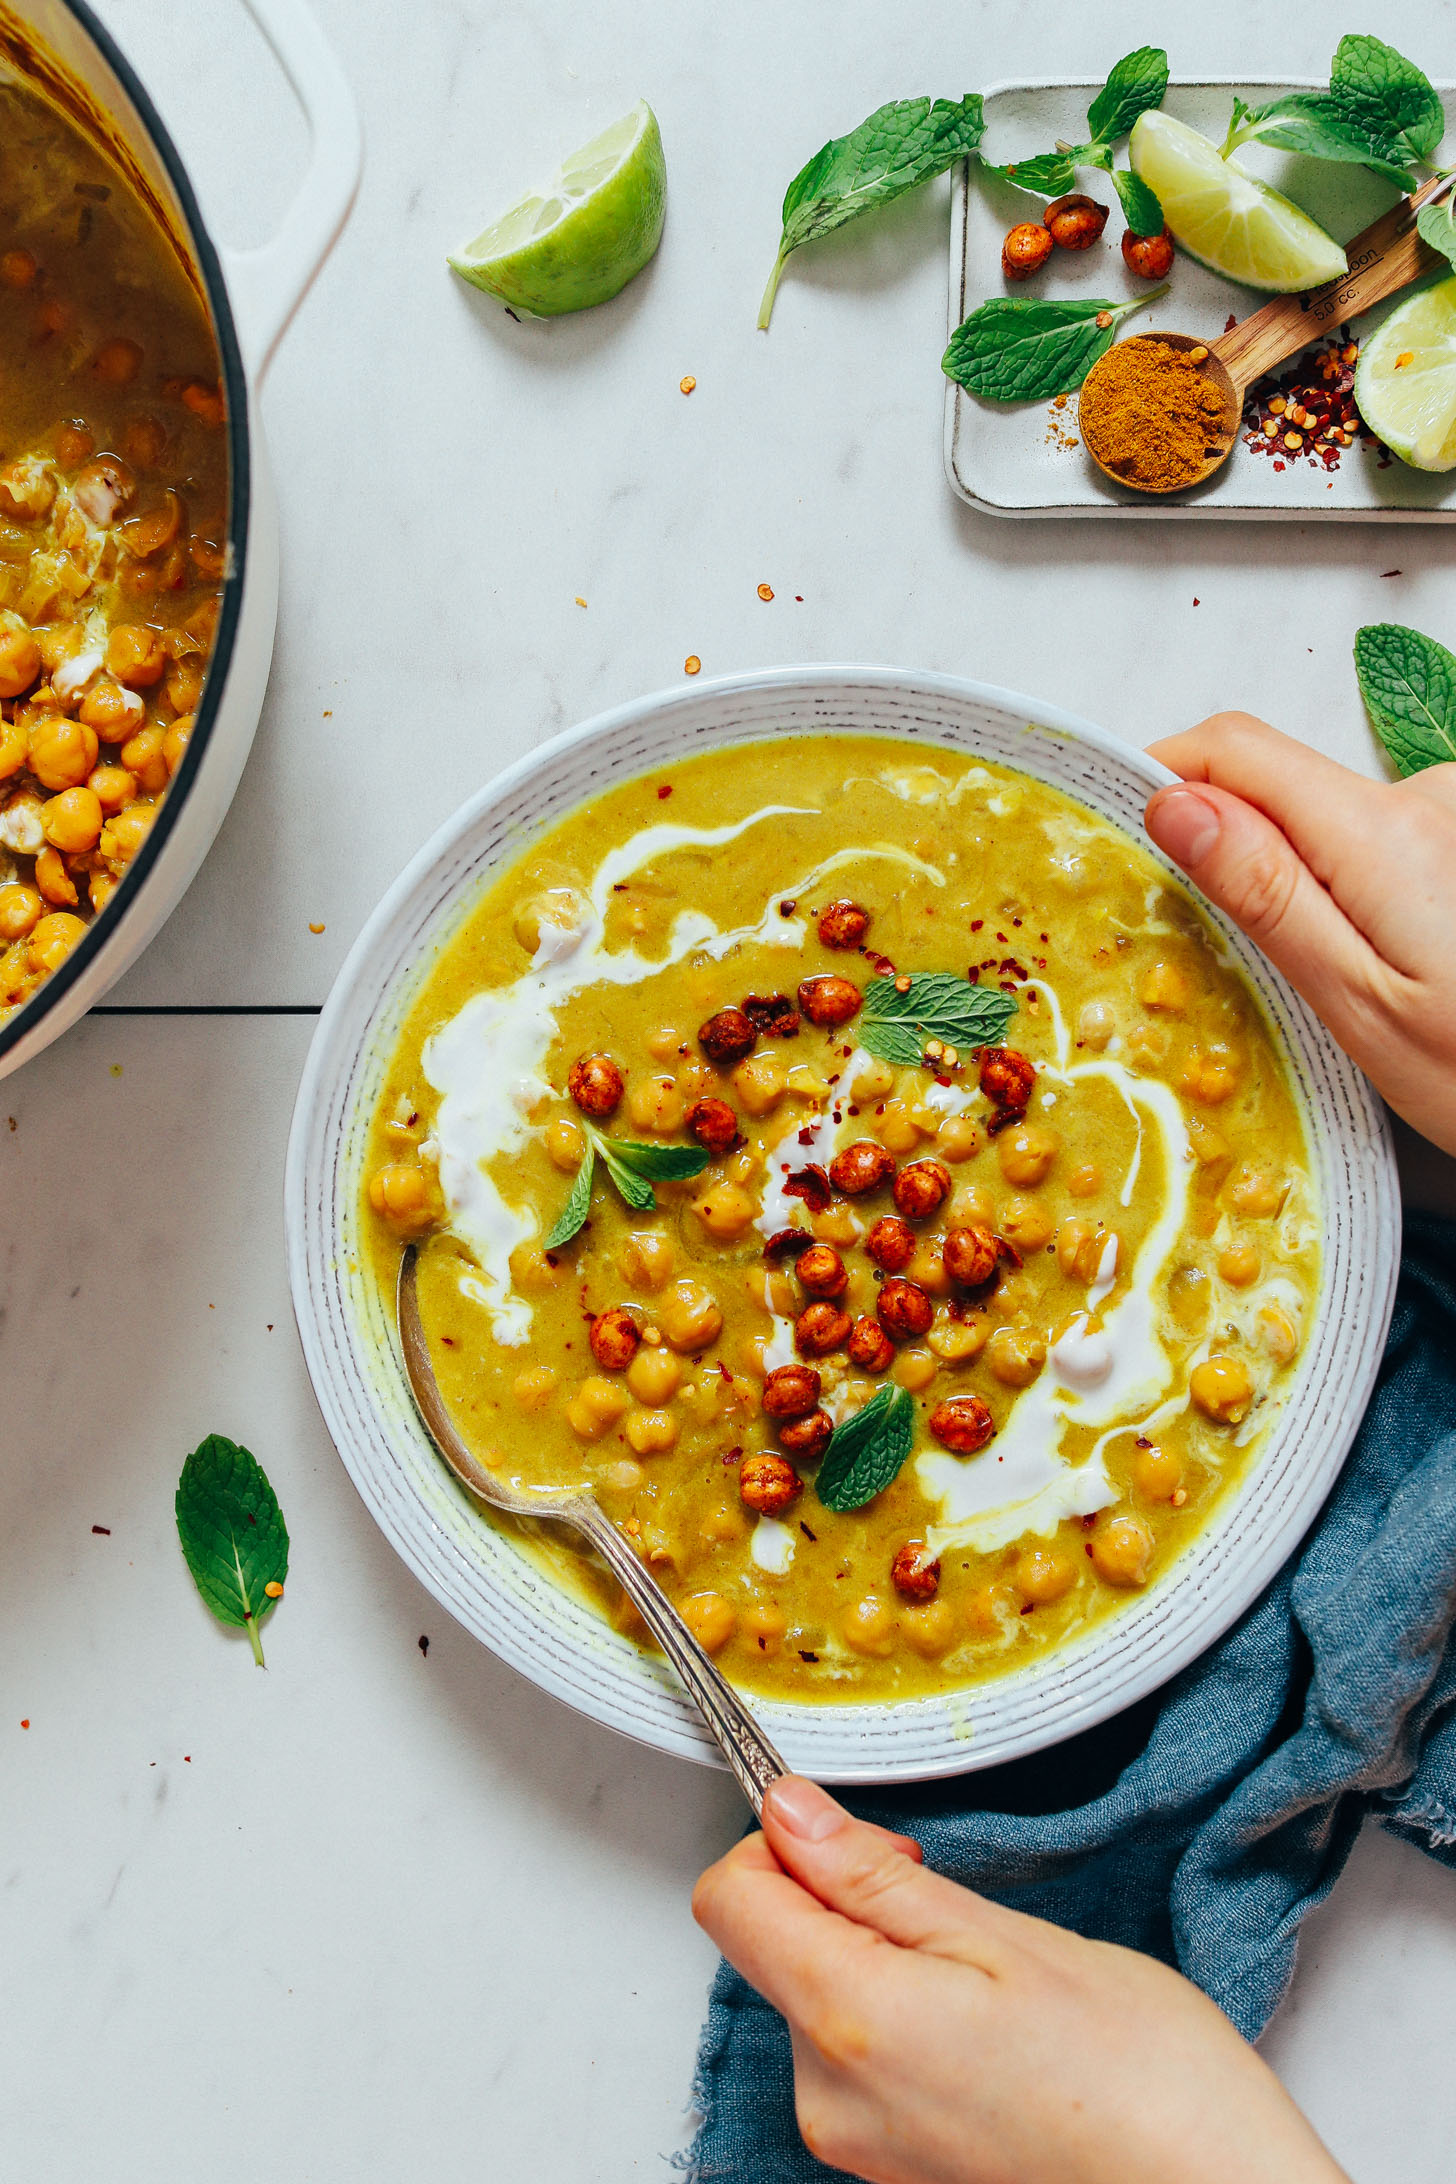 Holding the side of a bowl and a spoon in a bowl of Curried Chickpea Soup